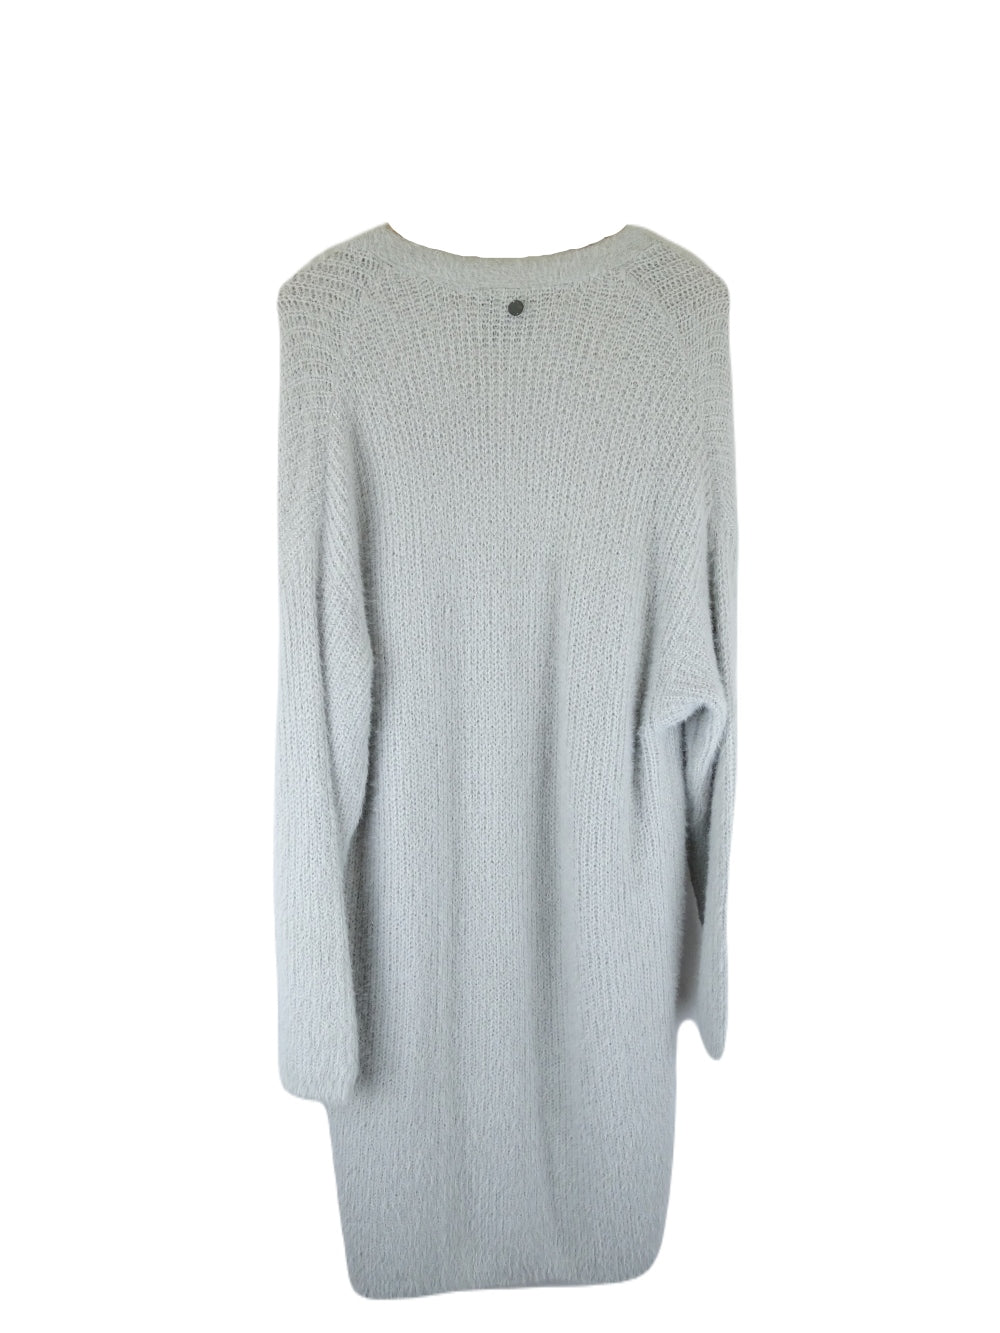 All About Eve Grey Cardigan 12